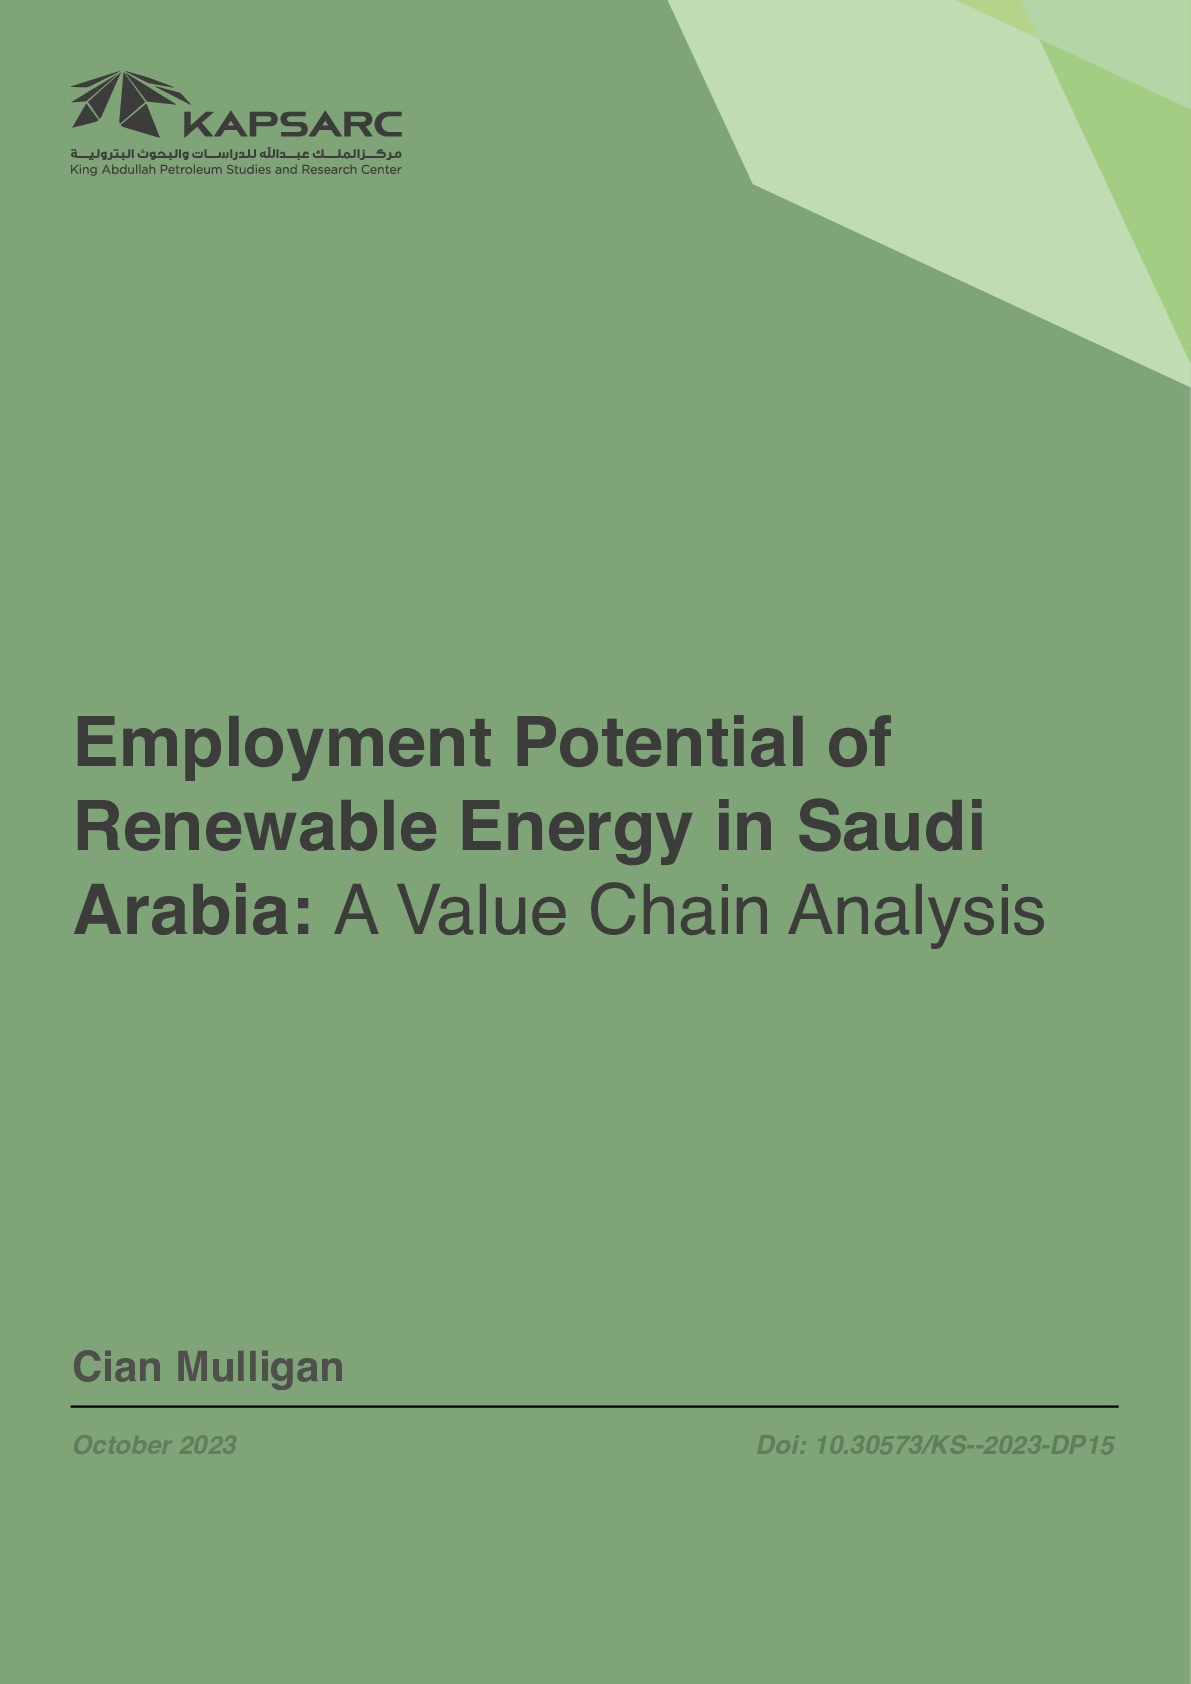 Employment Potential of Renewable Energy in Saudi Arabia: A Value Chain Analysis